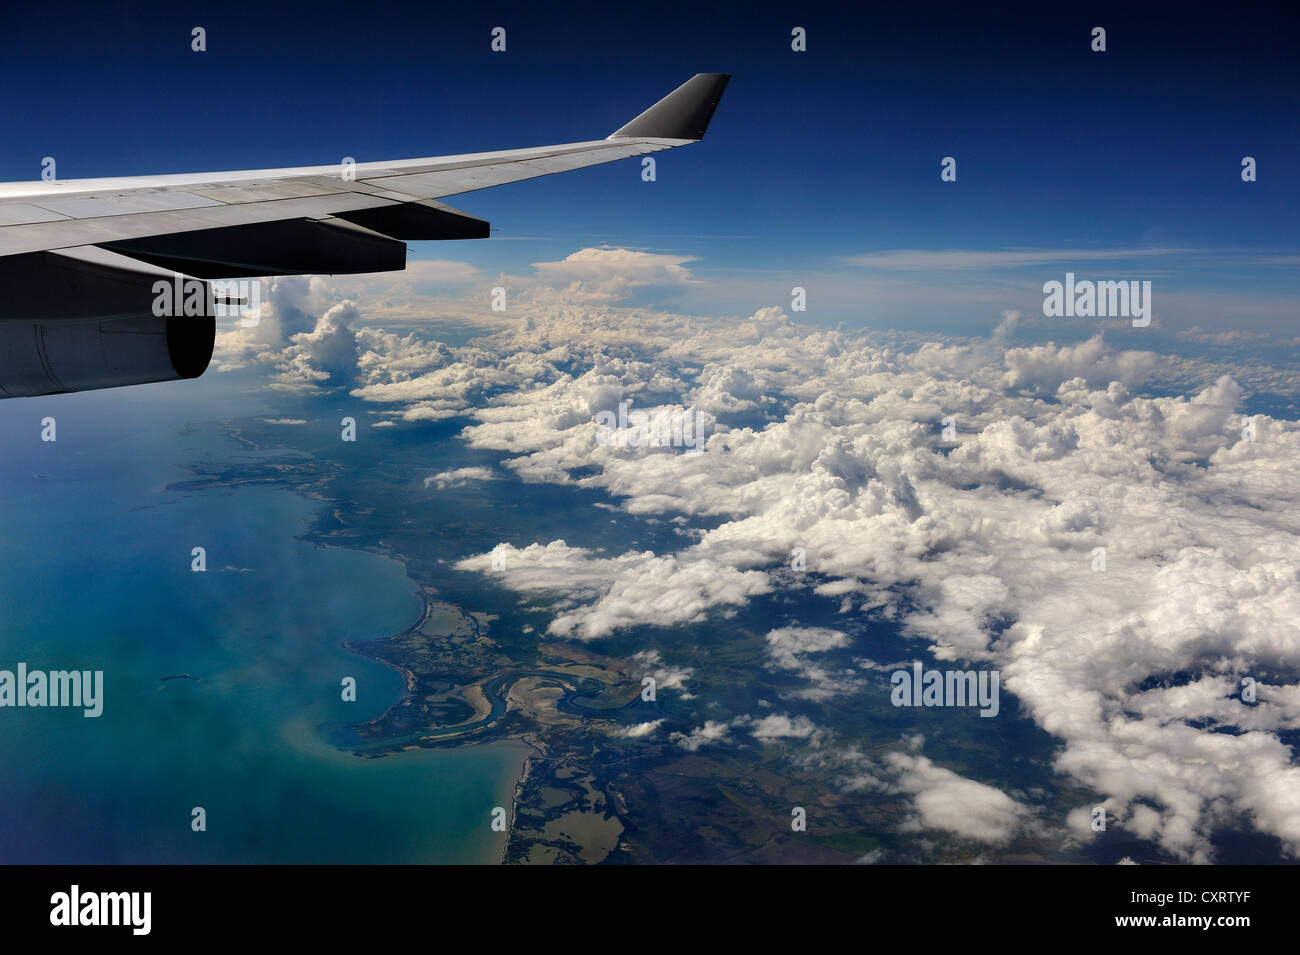 View from an aircraft, clouds and the ocean from above, wing of an airplane, Cuba, Caribbean Stock Photo